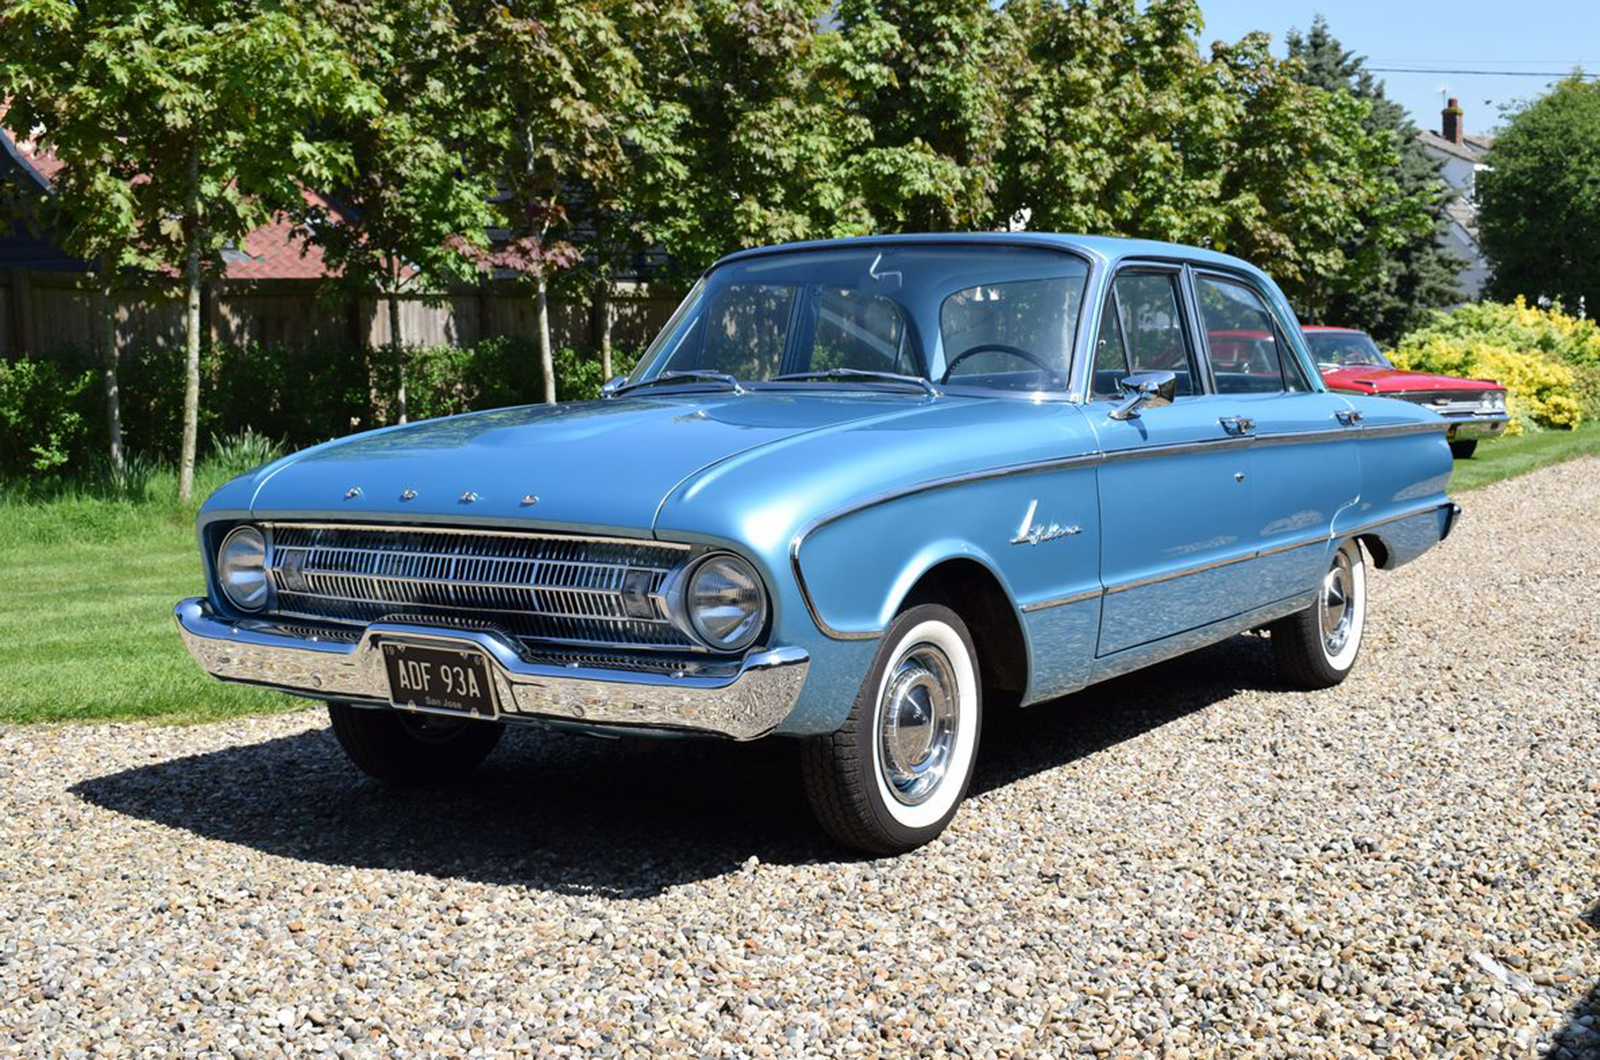 brightwells_Bicester_auction_ford_falcon.png